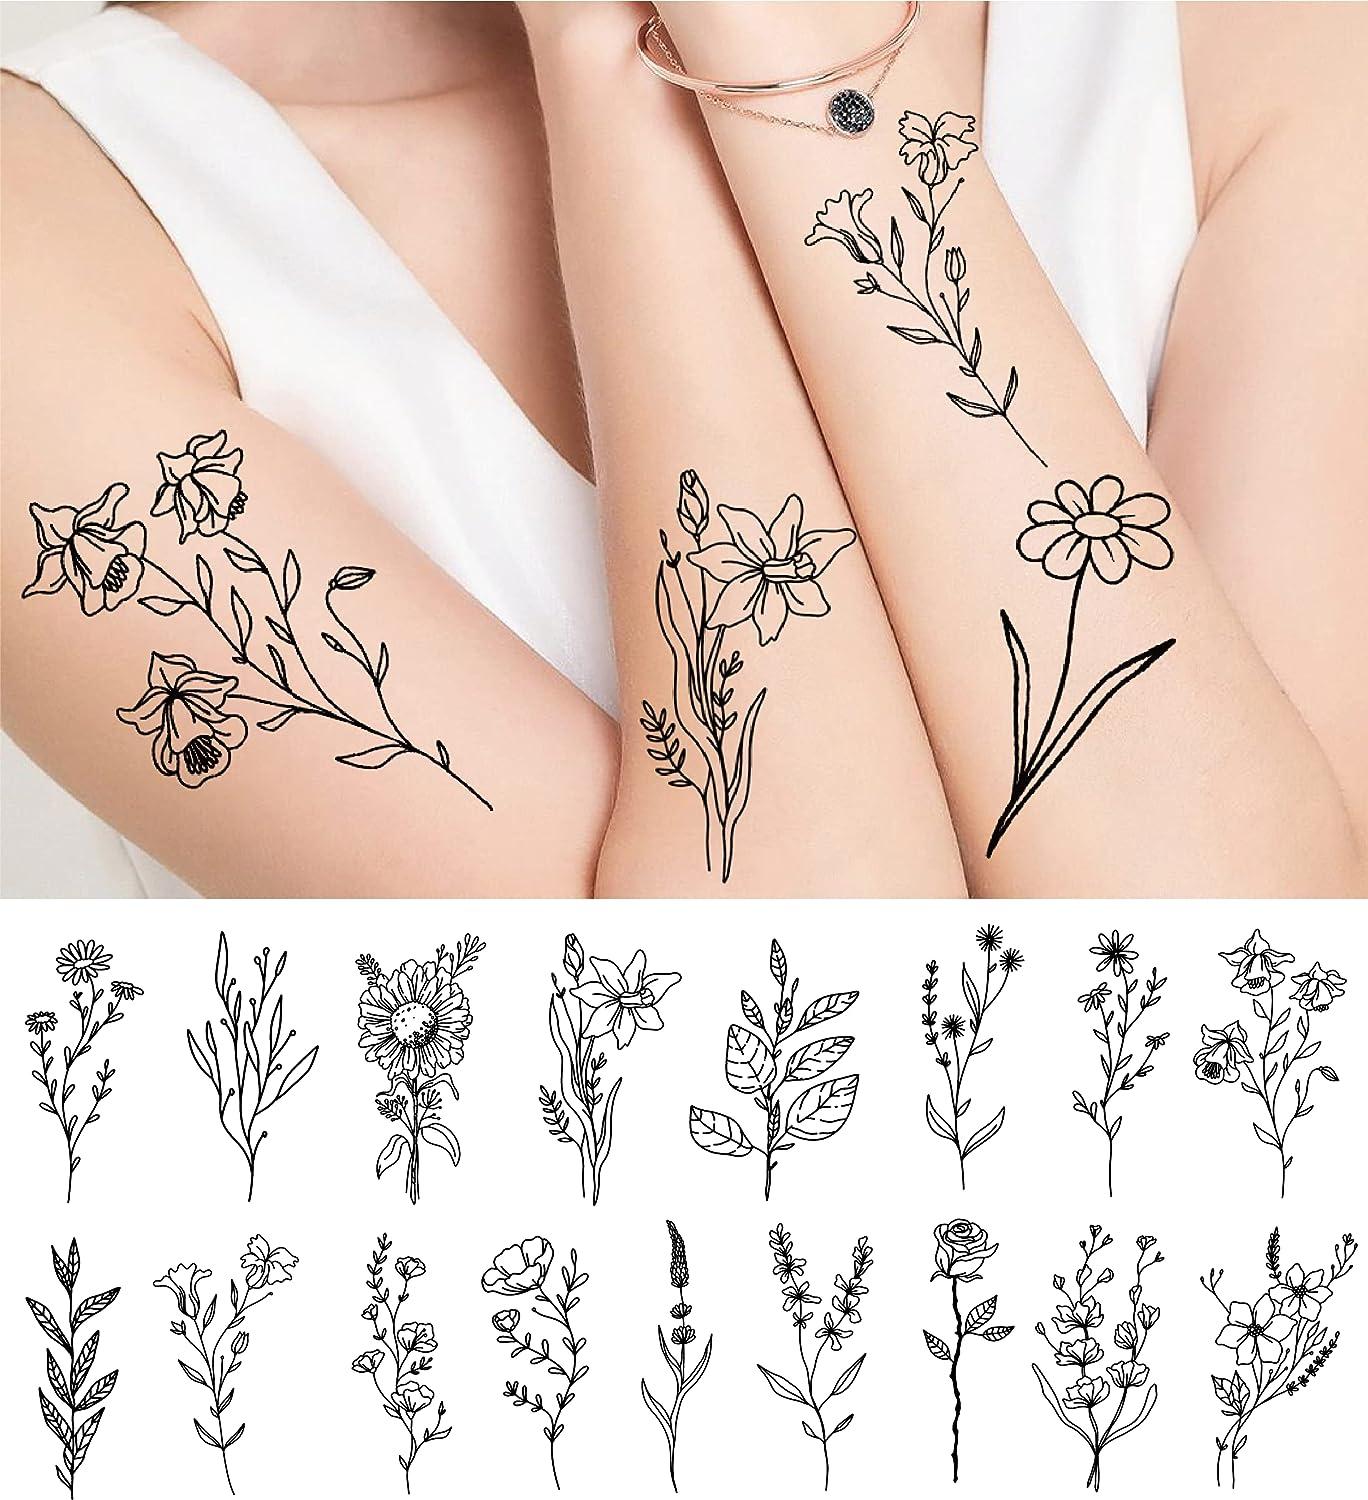 Flower tattoo - Visions Tattoo and Piercing